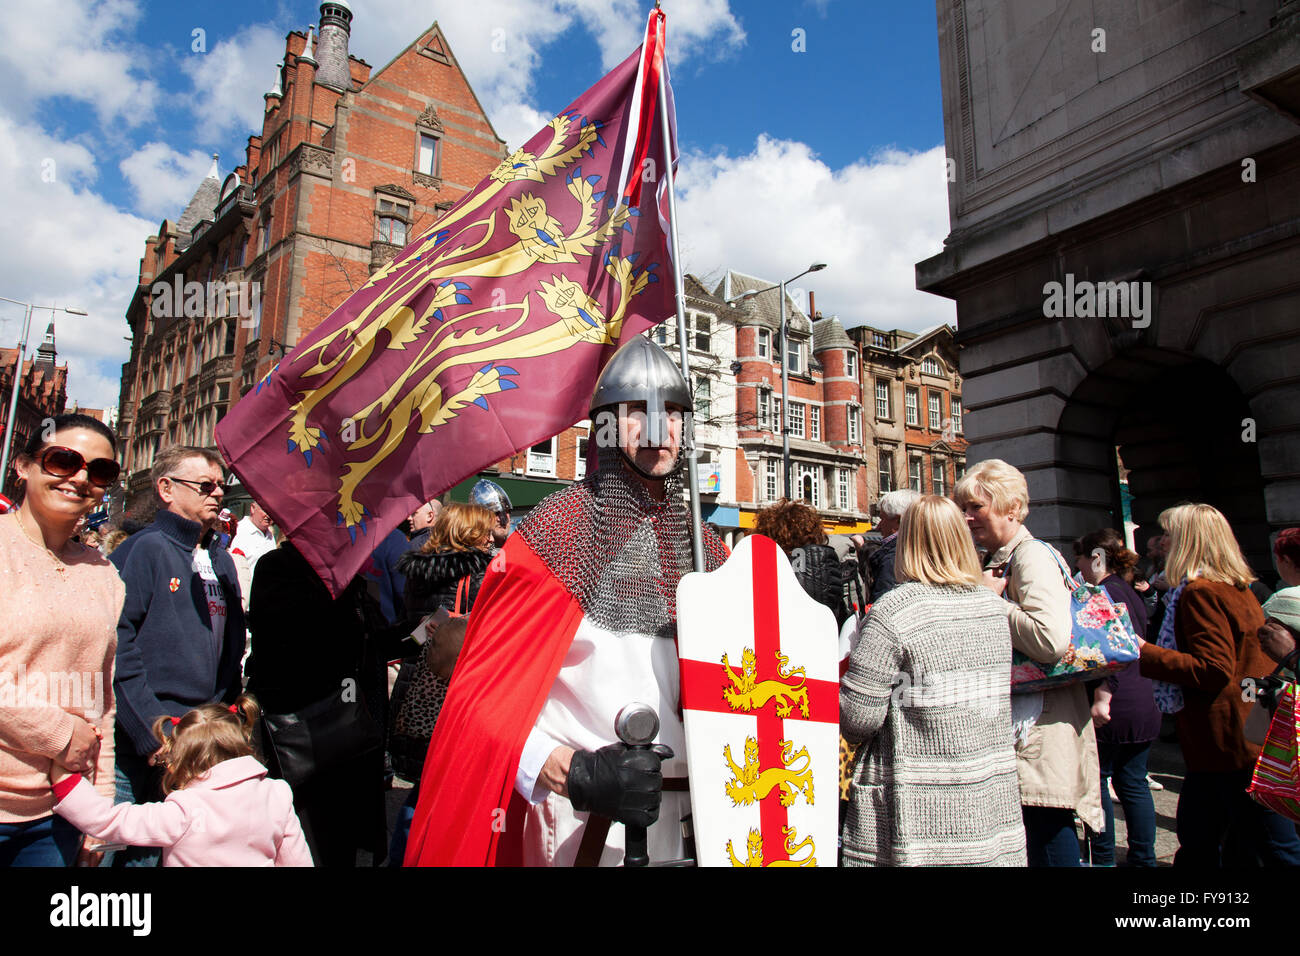 Old Market Square, Nottingham, U.K. 23rd April 2016. Crowds at the St George's Day parade and celebration in Nottingham's Old Market Square. St George is the patron saint of England and St George's Day, which is celebrated on the 23rd April, is traditionally accepted as the date of Saint George's death in 303 AD. Credit:  Mark Richardson/Alamy Live News Stock Photo